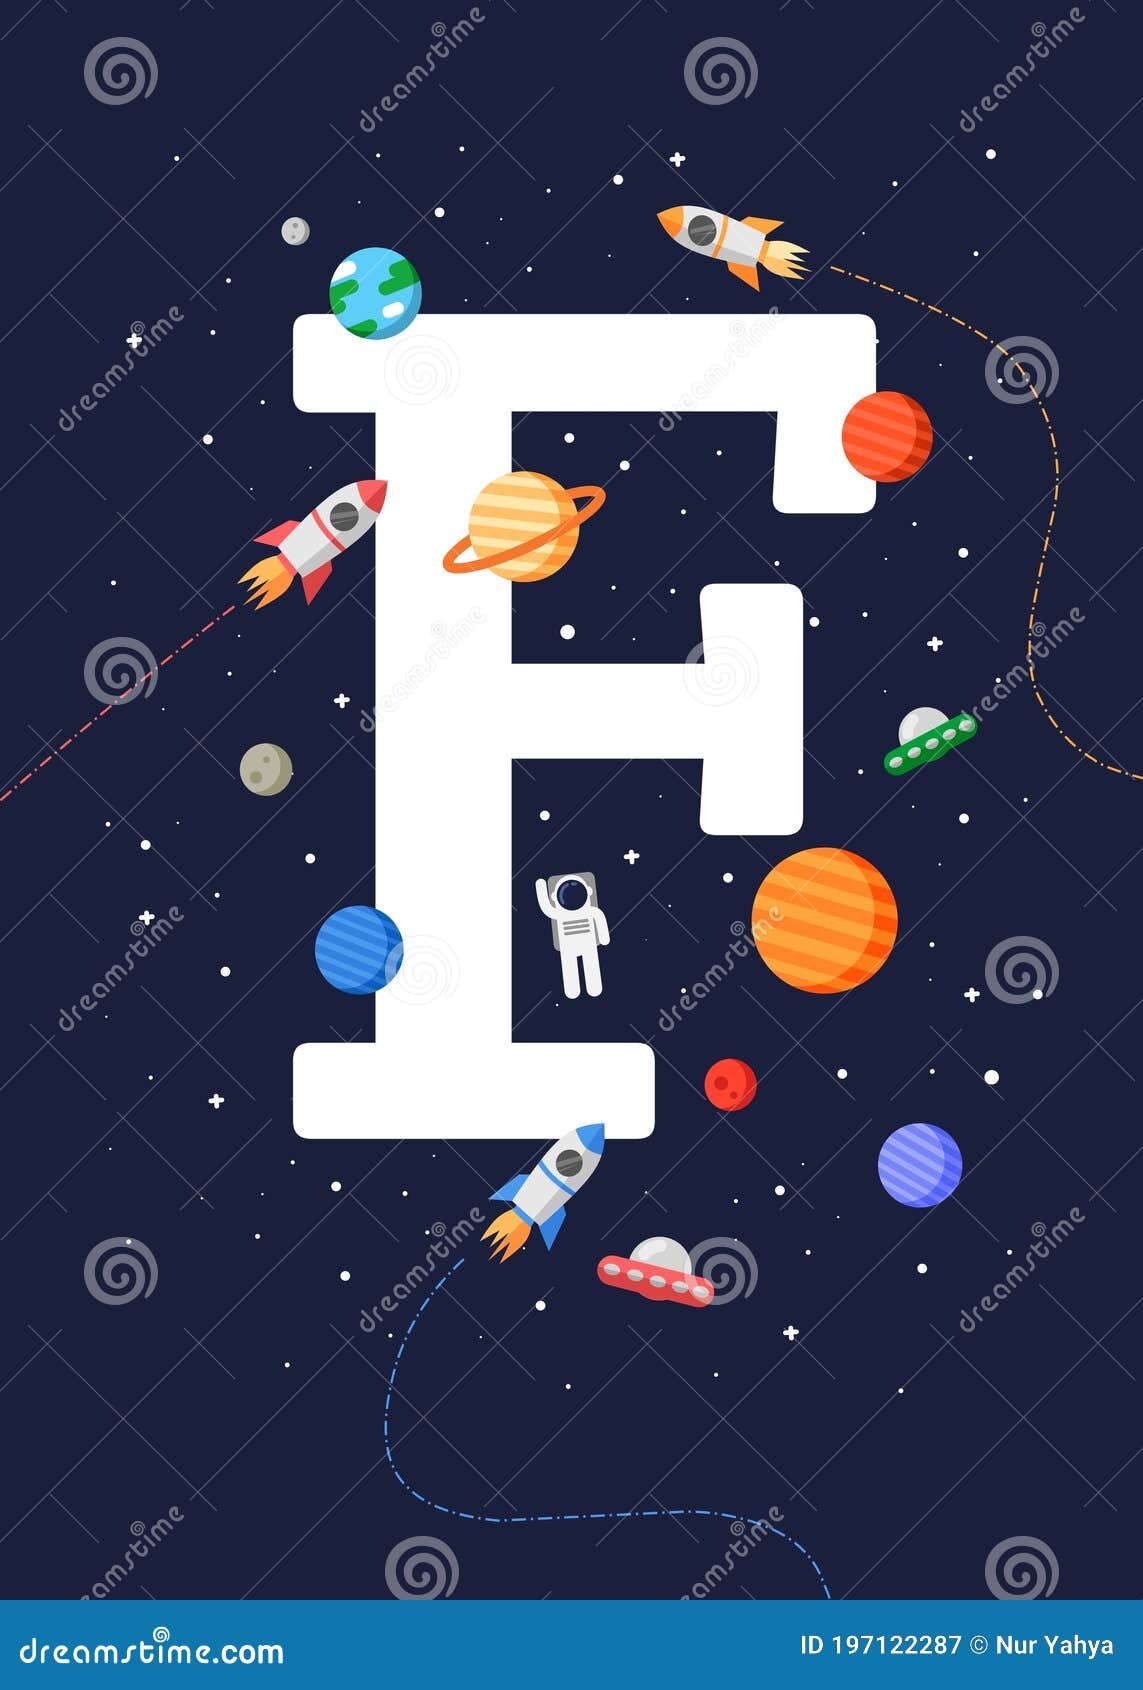 Kids Educational Poster `Letter F` with a Print-ready Space Theme. Space  Kids. Stock Illustration - Illustration of kidseducation, mars: 197122287